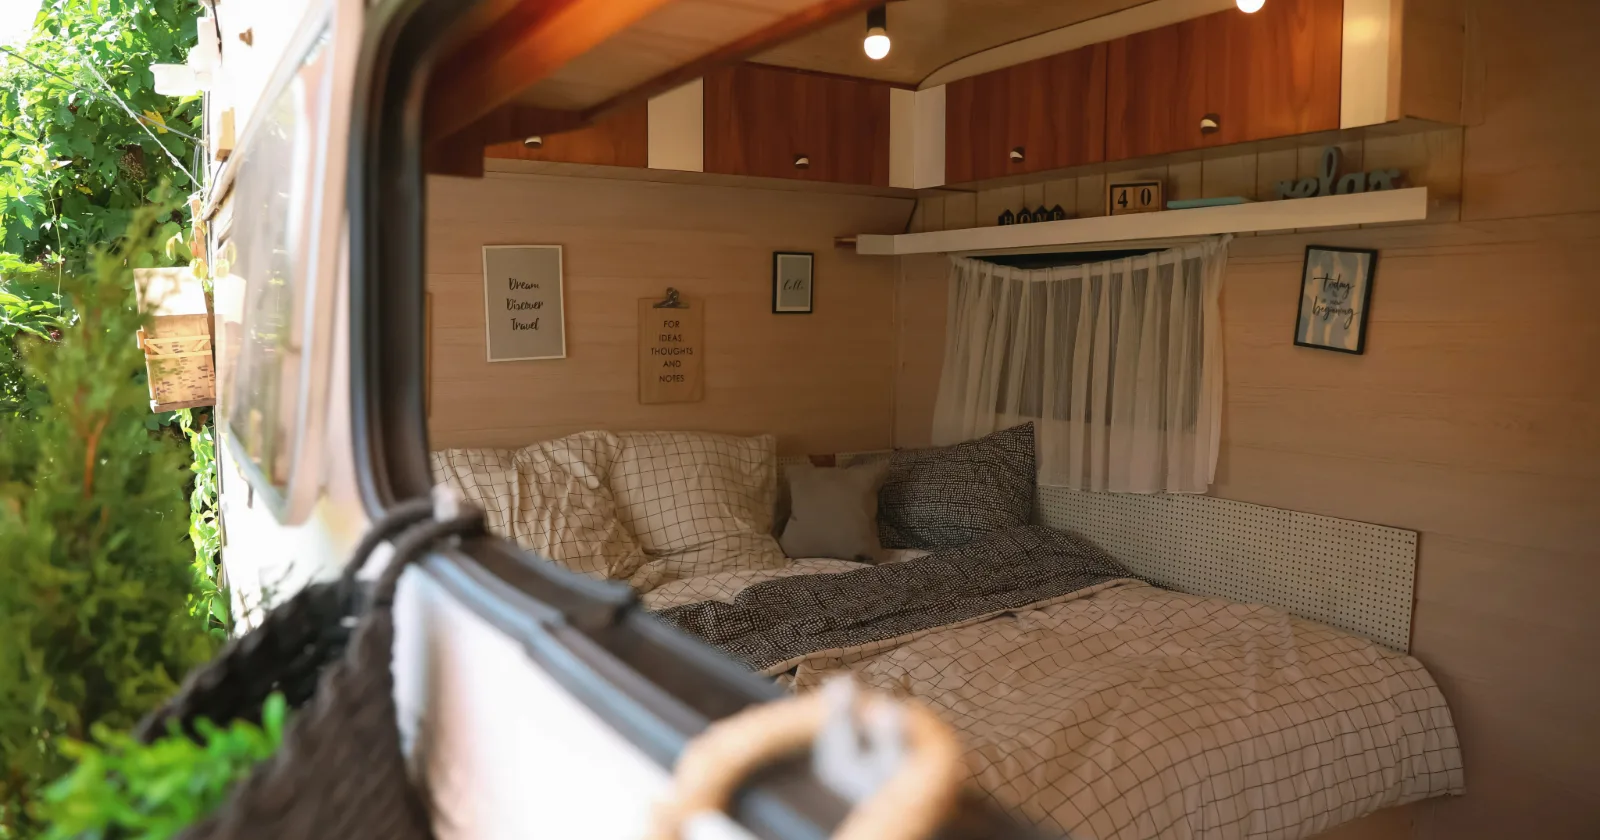 Stylish interior with comfortable bed and pillows in modern trailer, view from outside